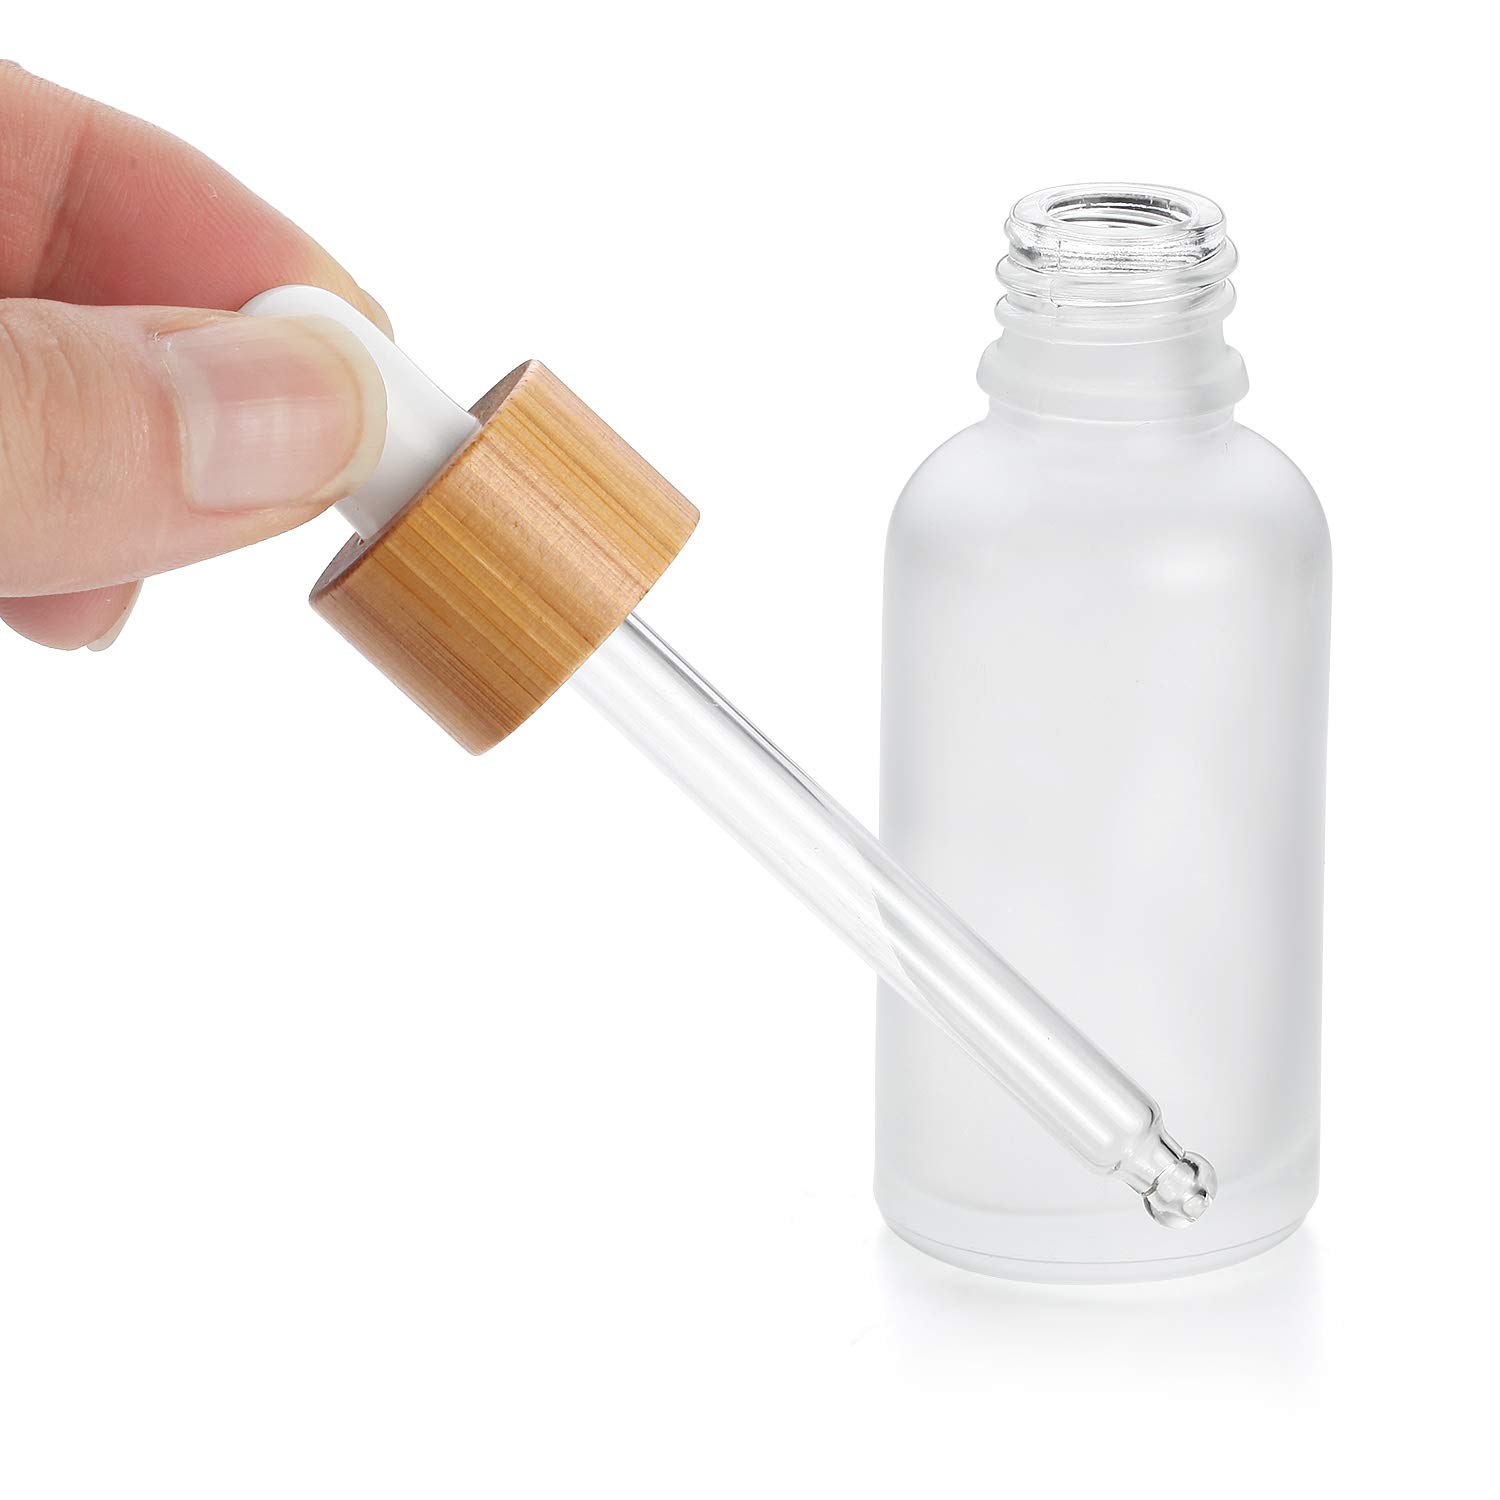 30ml BPA free and Lead-free Reusable and Refillable Cosmetic Packaging Bamboo Glass Essential Oil Dropper Bottles with Lid